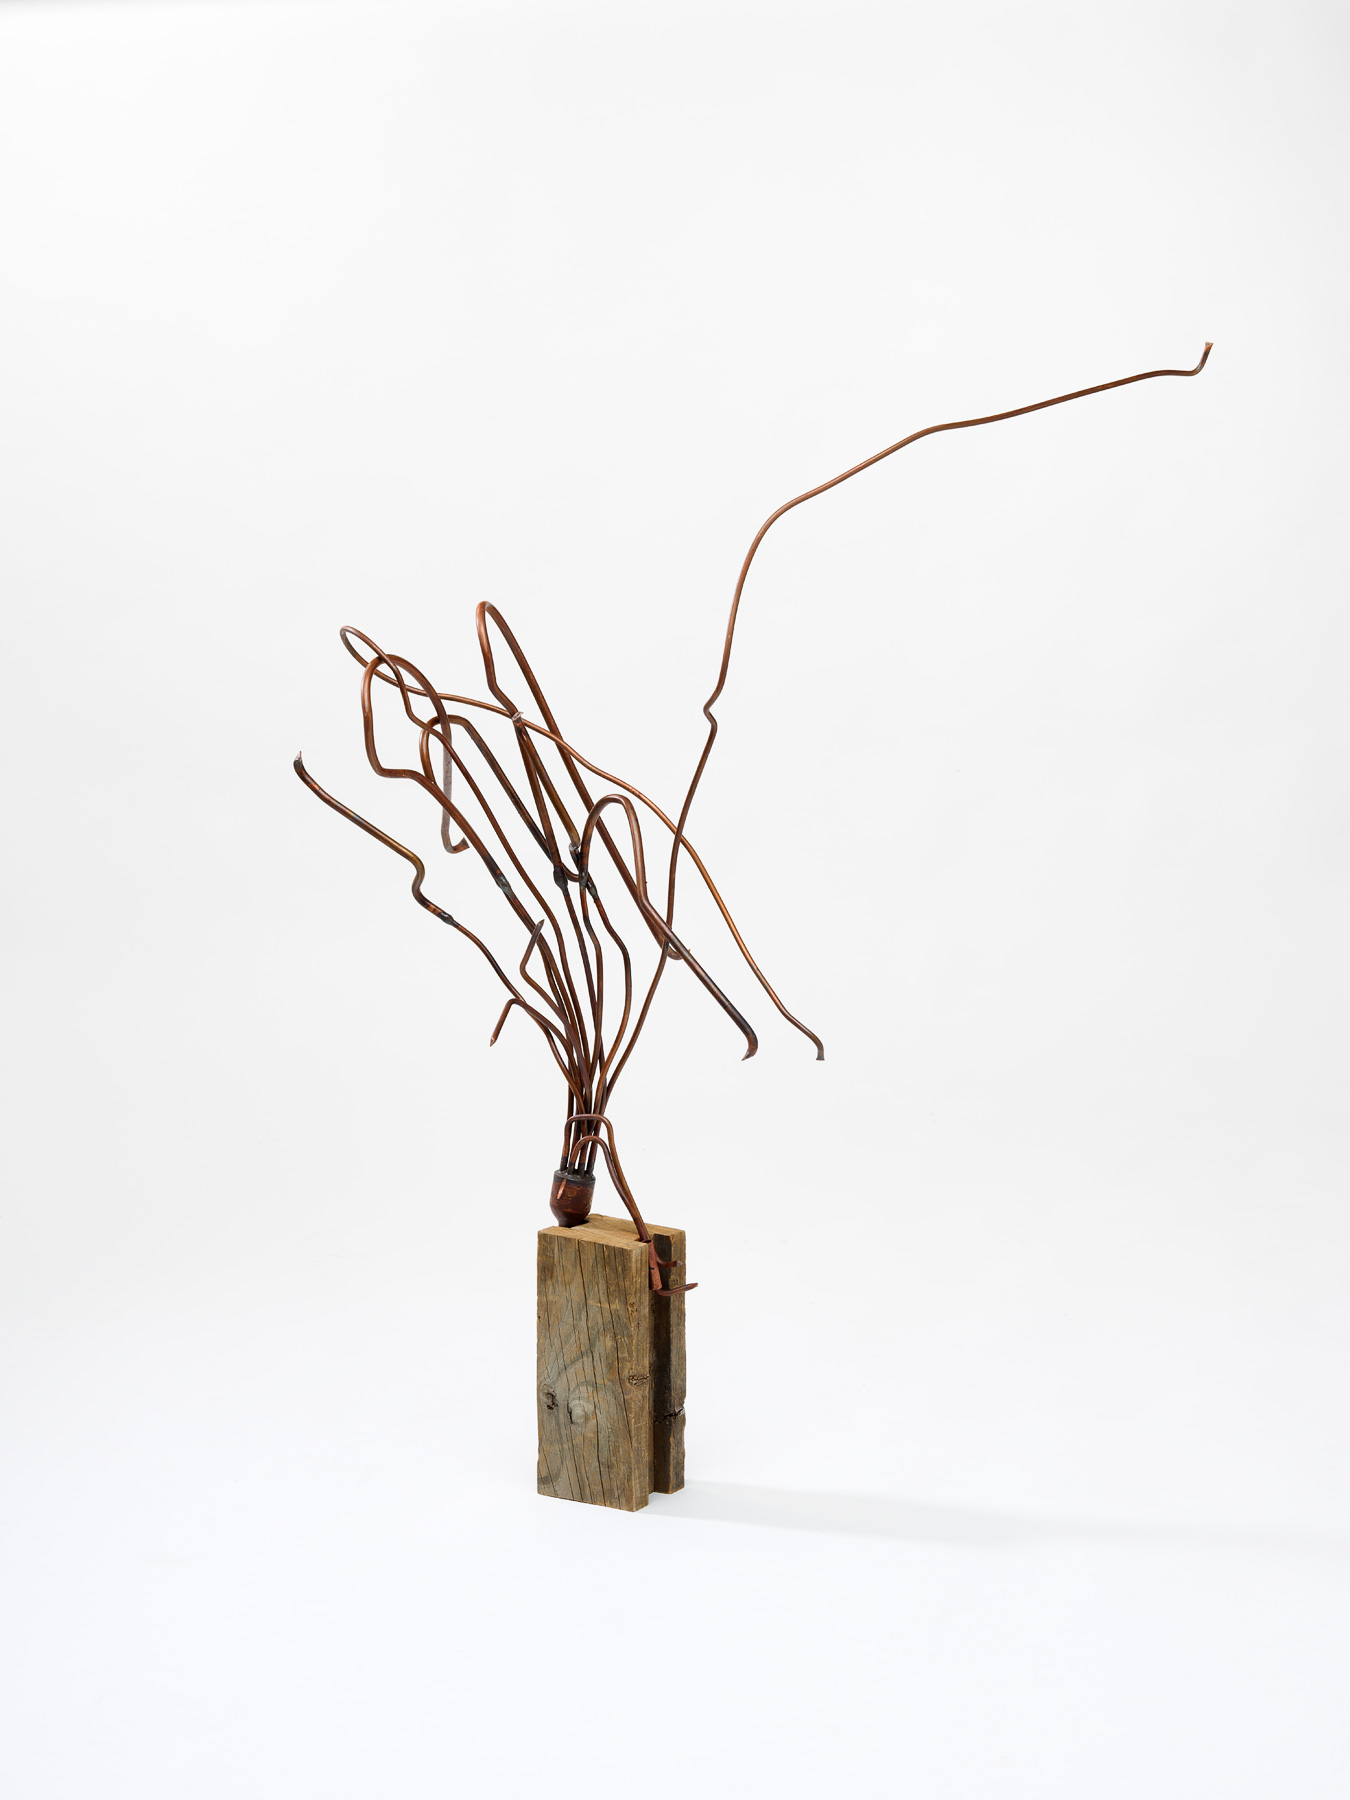   Flux,  2018  copper piping and wood block  97 x 62 x 45 cm  Photograph Grant Hancock 